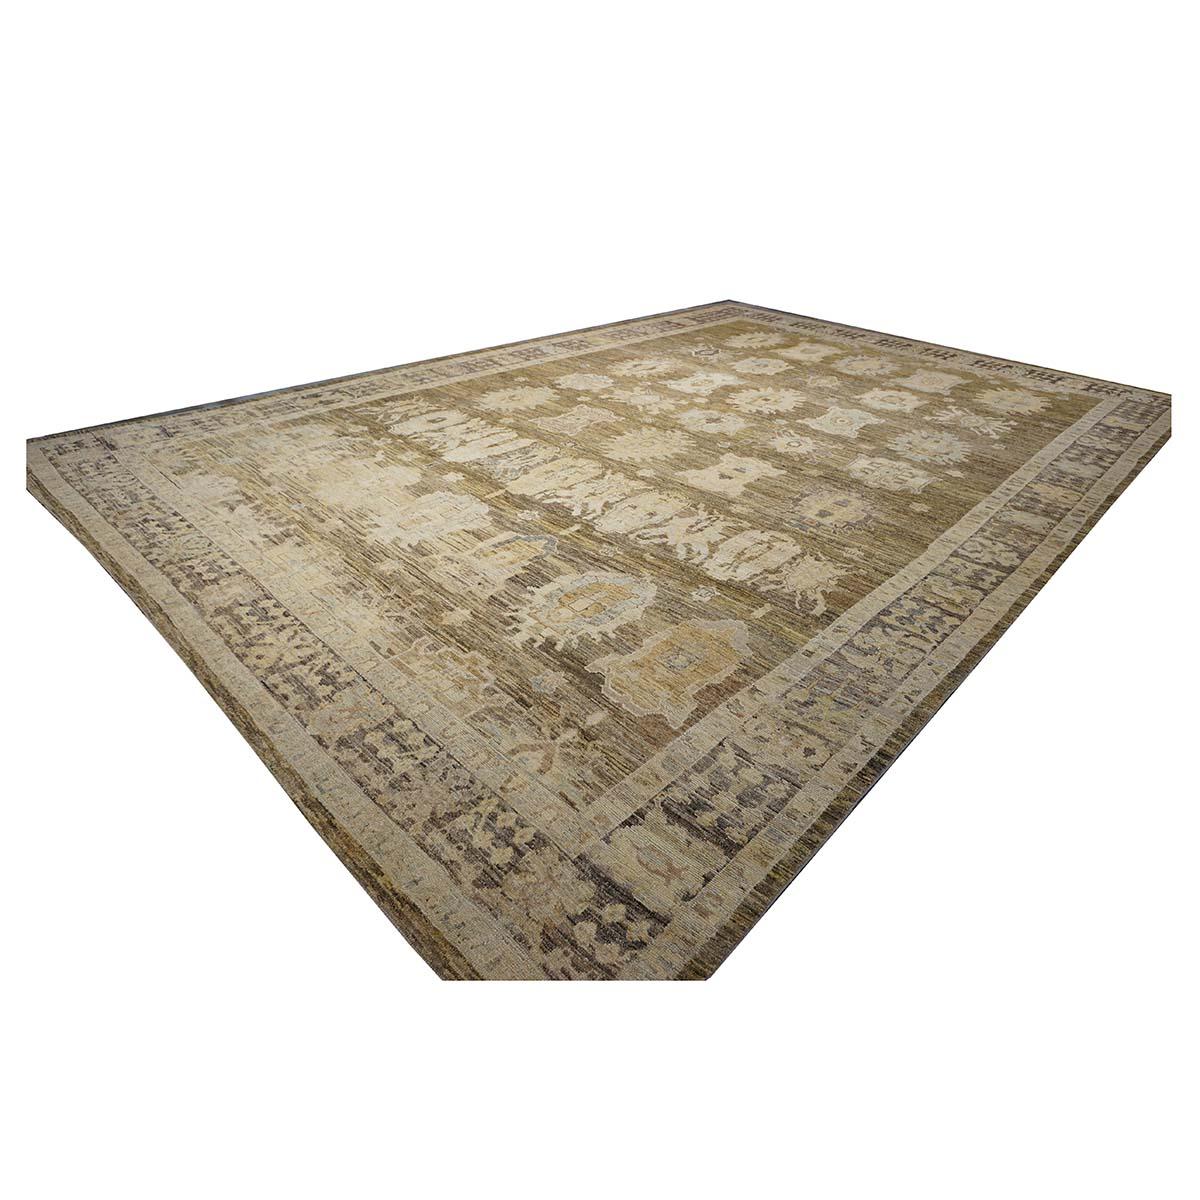 Contemporary 21st Century Turkish Oushak 15x23 Brown, Charcoal & Ivory Handmade Oversized Rug For Sale